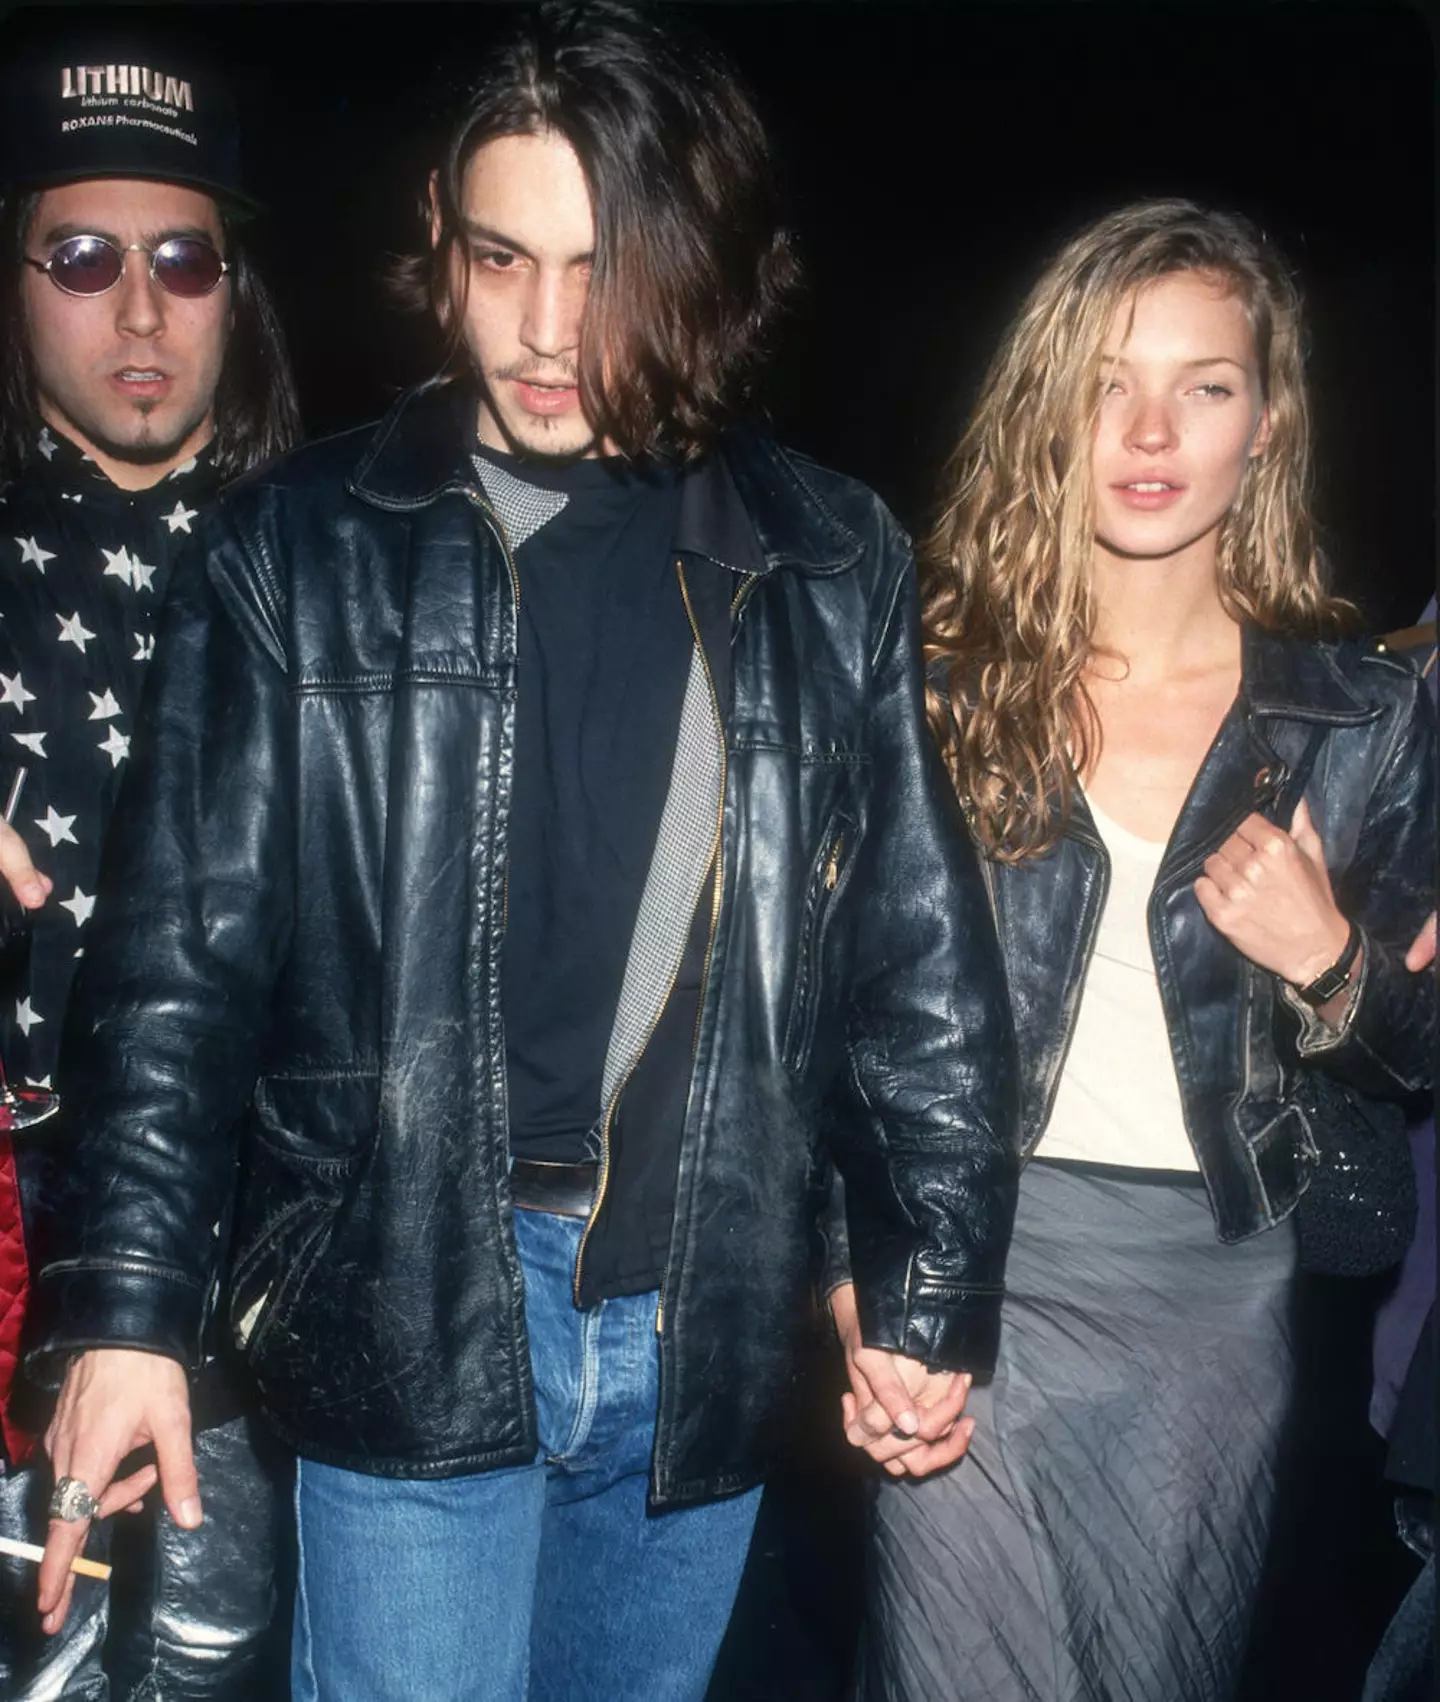 Johnny Depp and Kate Moss dated in the 90s.